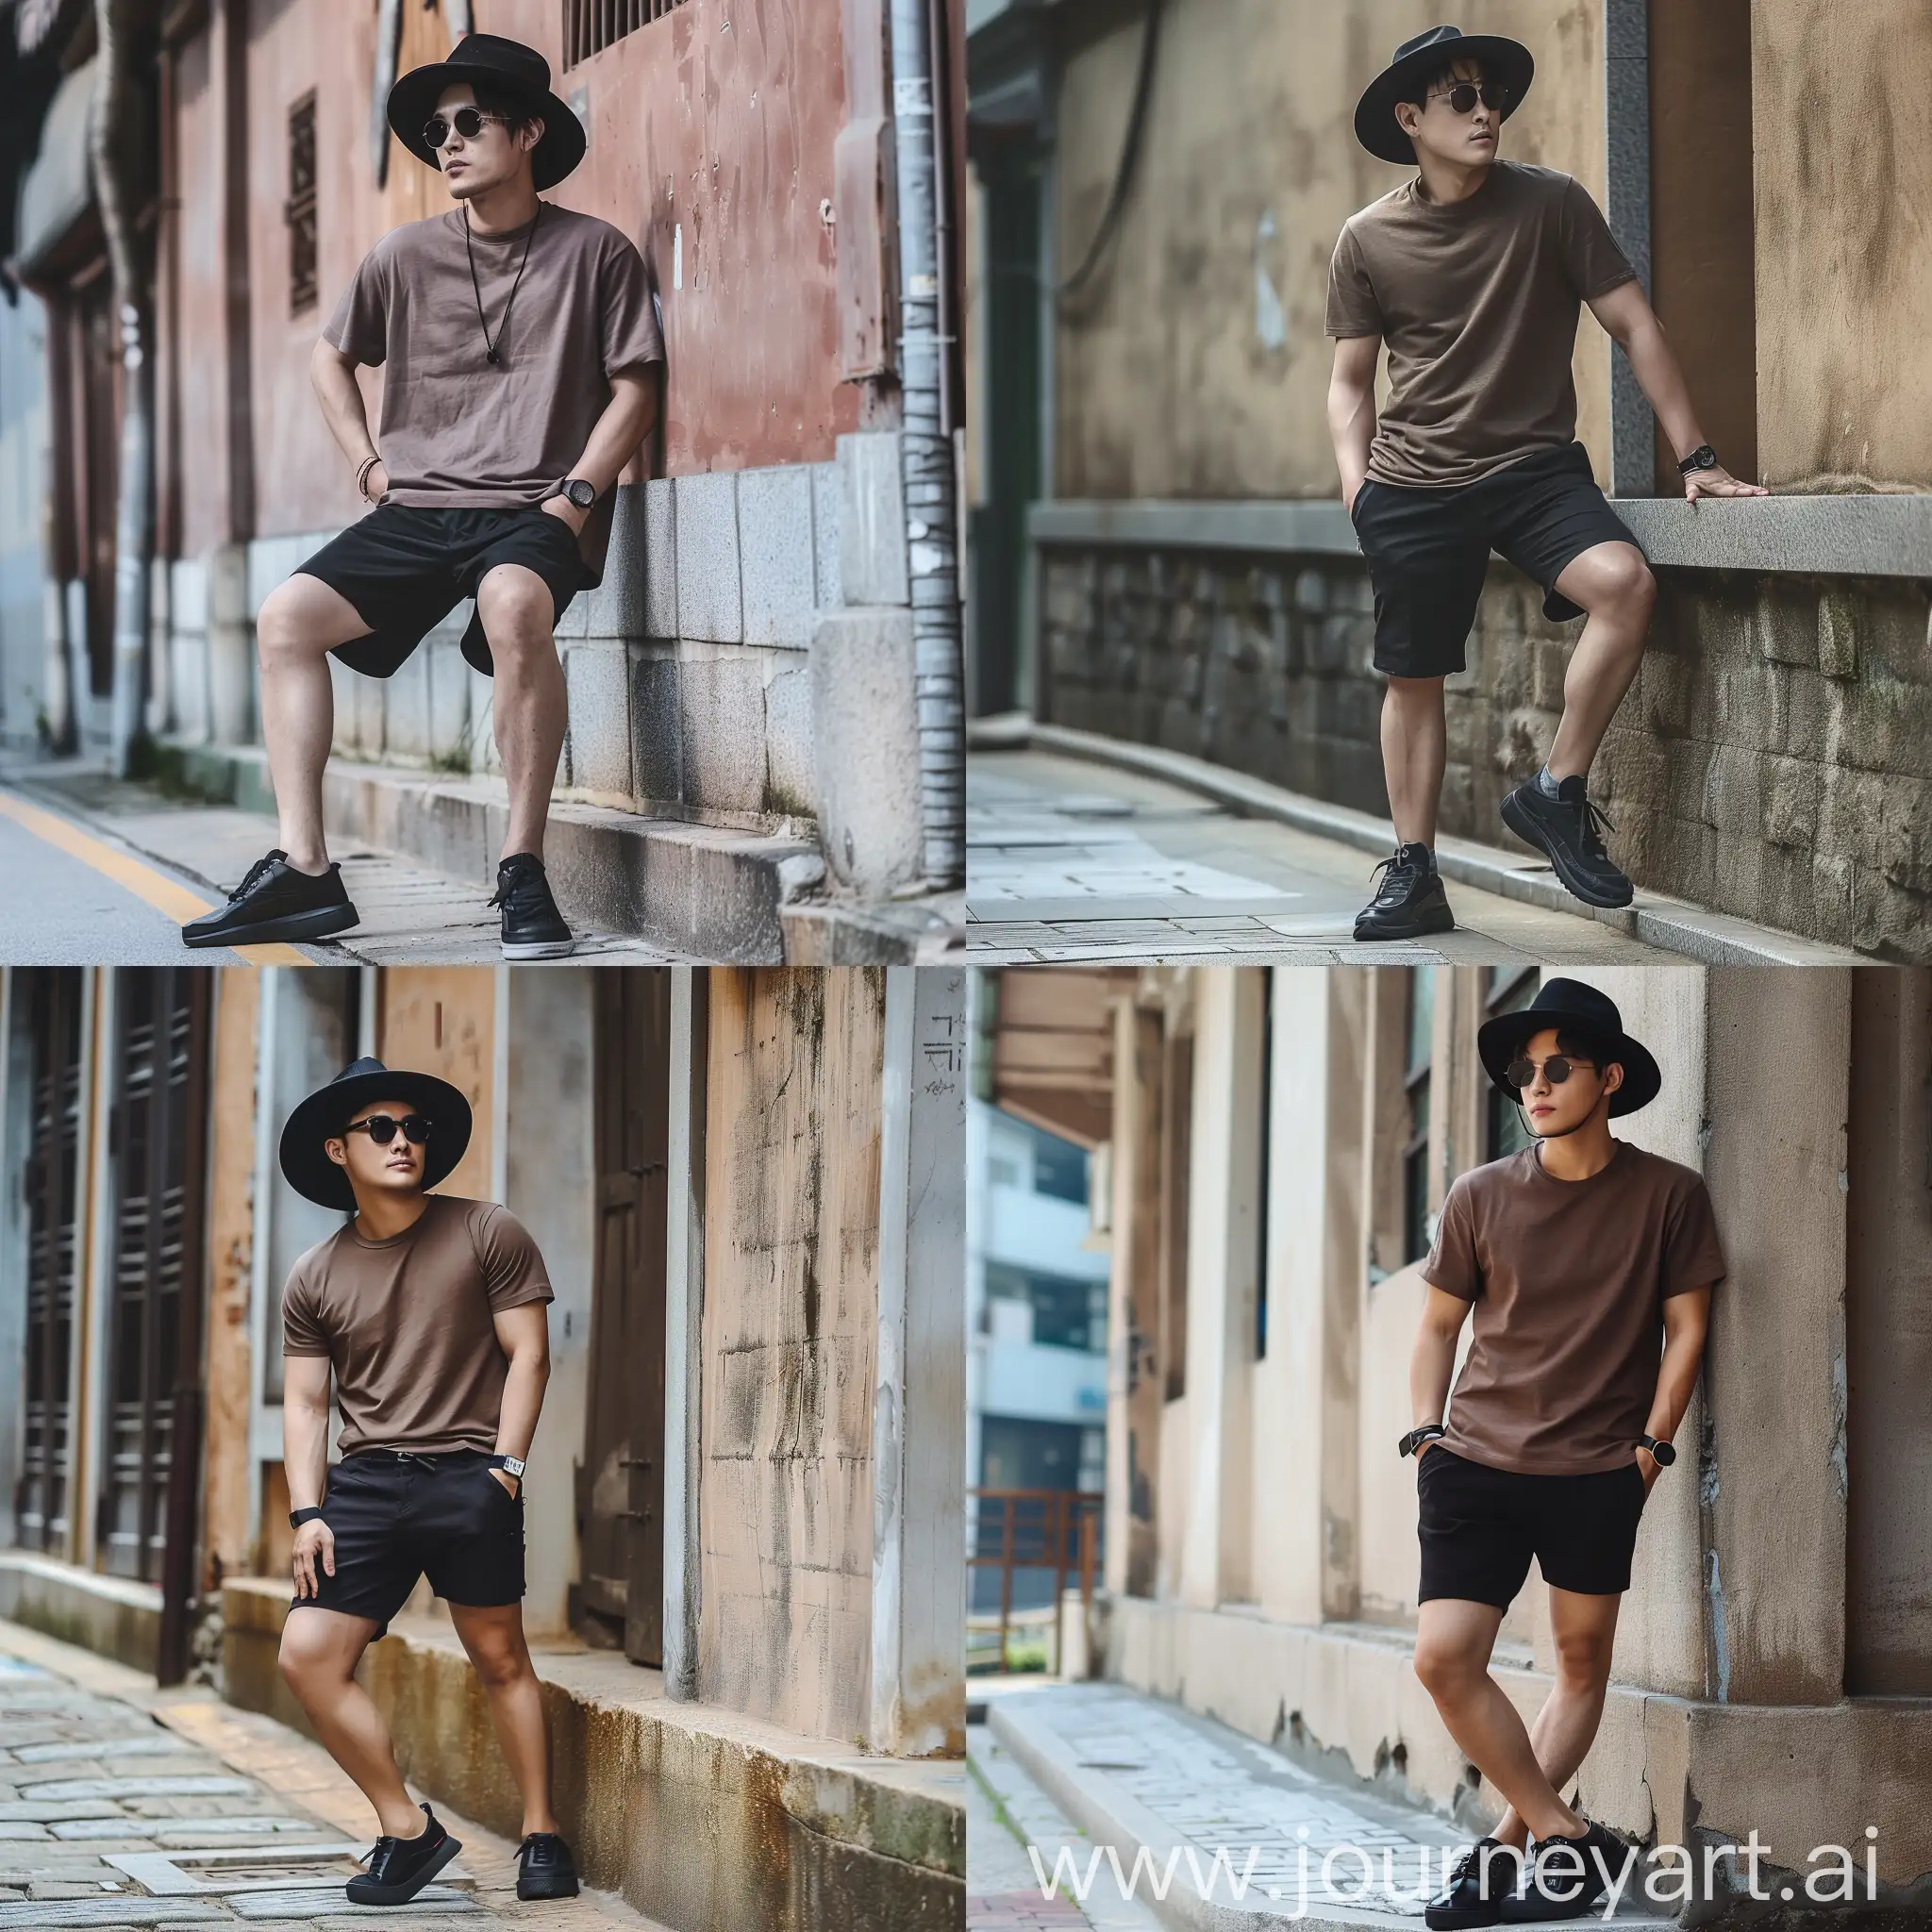 A 28-year-old handsome Korean man wearing a black hat, sunglasses, brown t-shirt, black shorts, and black shoes, leaning against a wall with an expression of looking to the left, with a background of a building wall, realistic HD